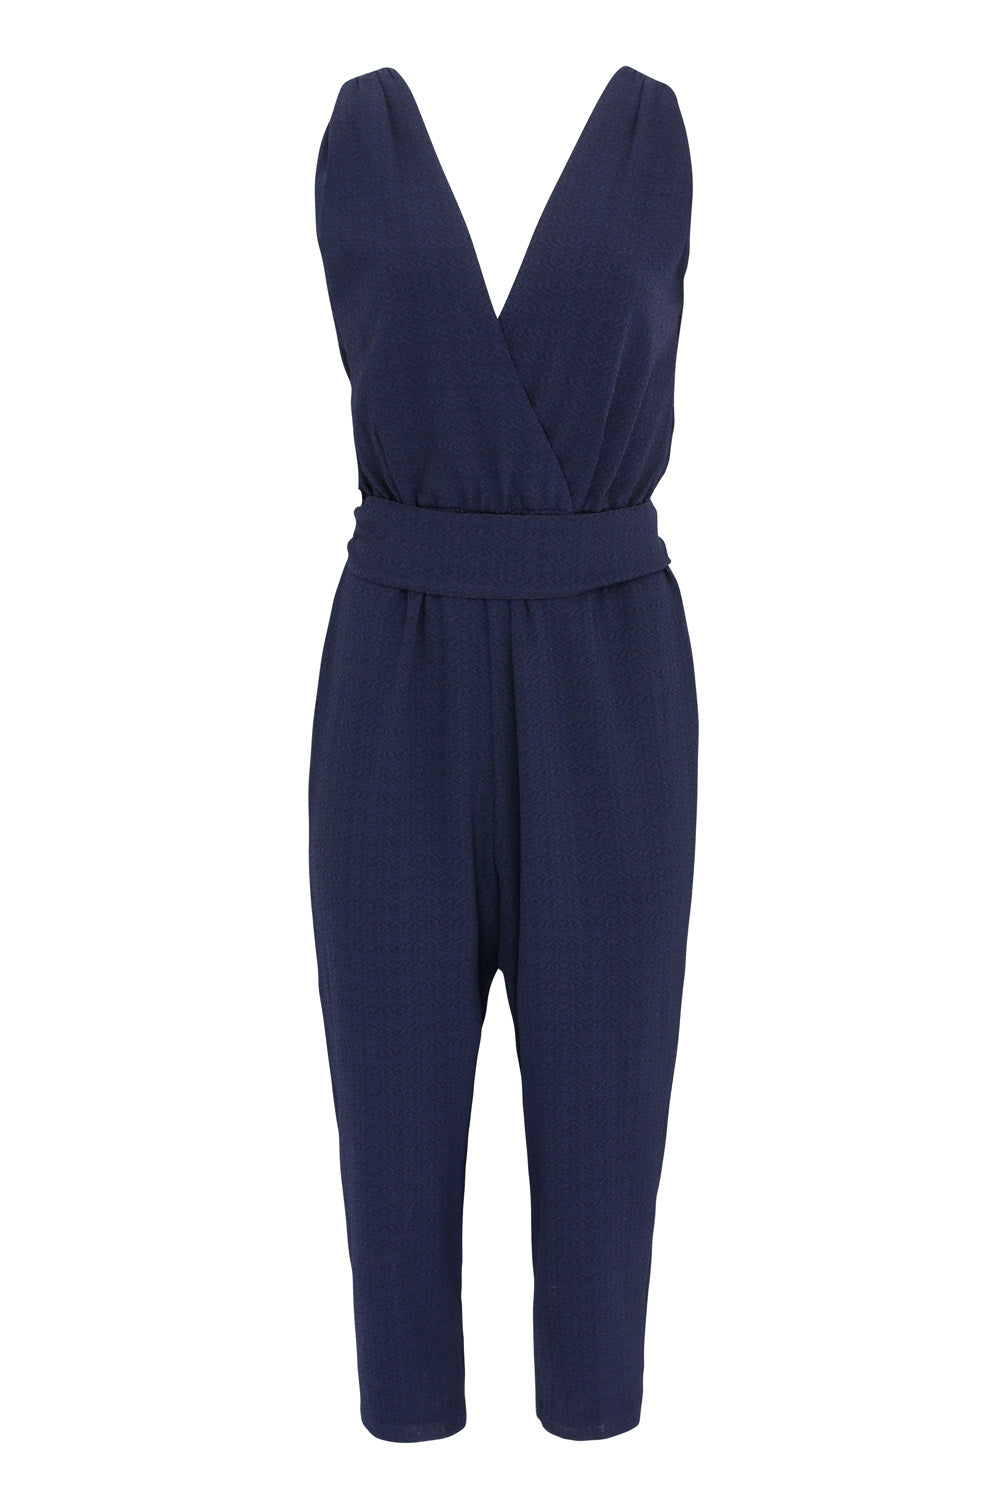 Just Like Heaven Navy jumpsuit - Family Affairs